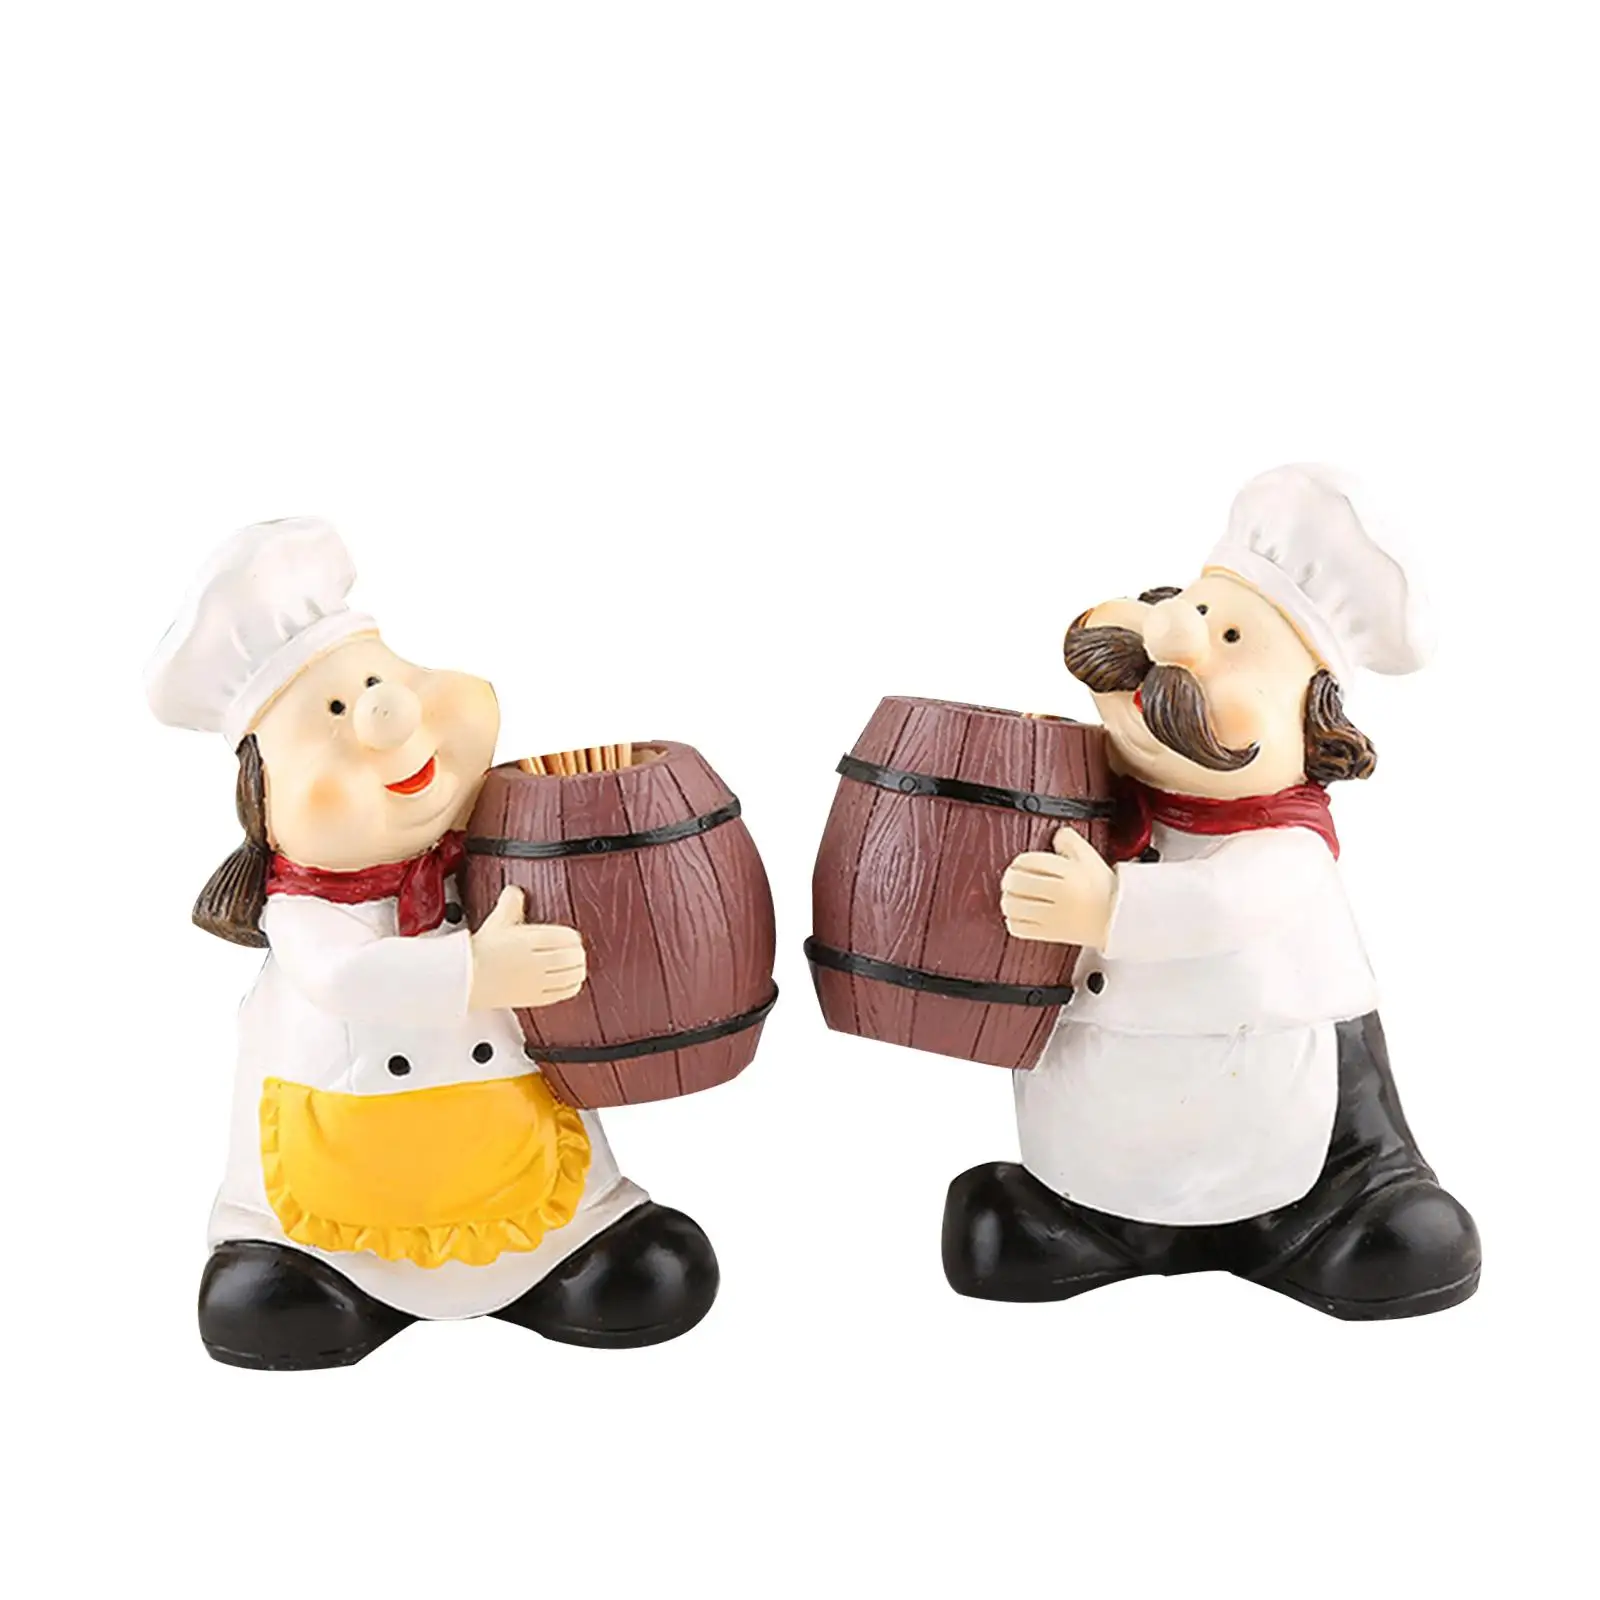 Nordic Chef Figurines Toothpick Holder Ornaments for Restaurant Decor